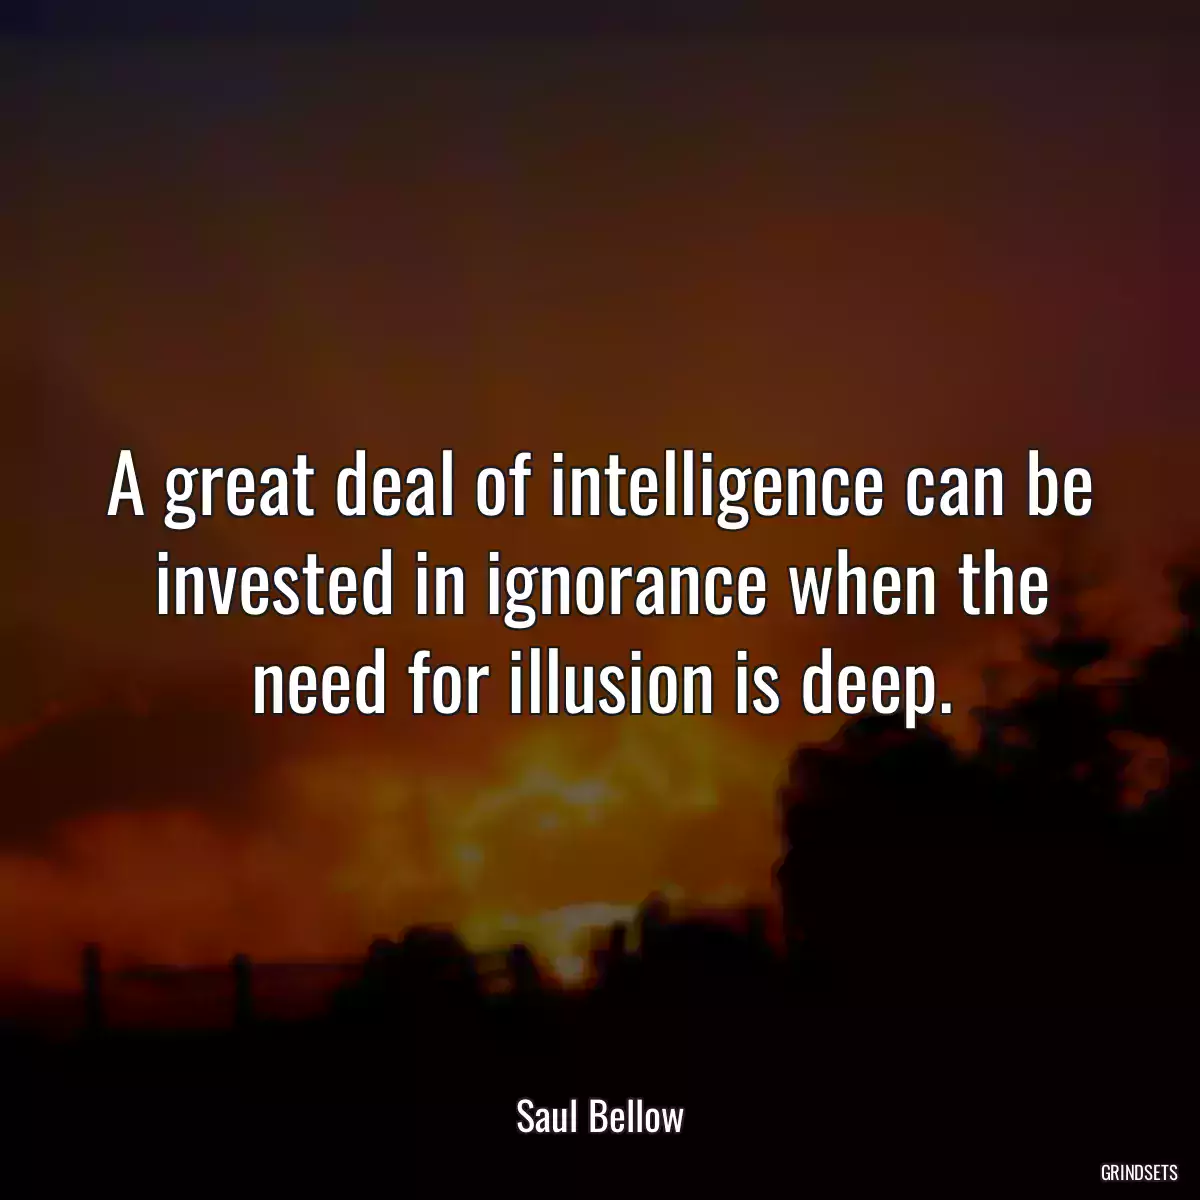 A great deal of intelligence can be invested in ignorance when the need for illusion is deep.